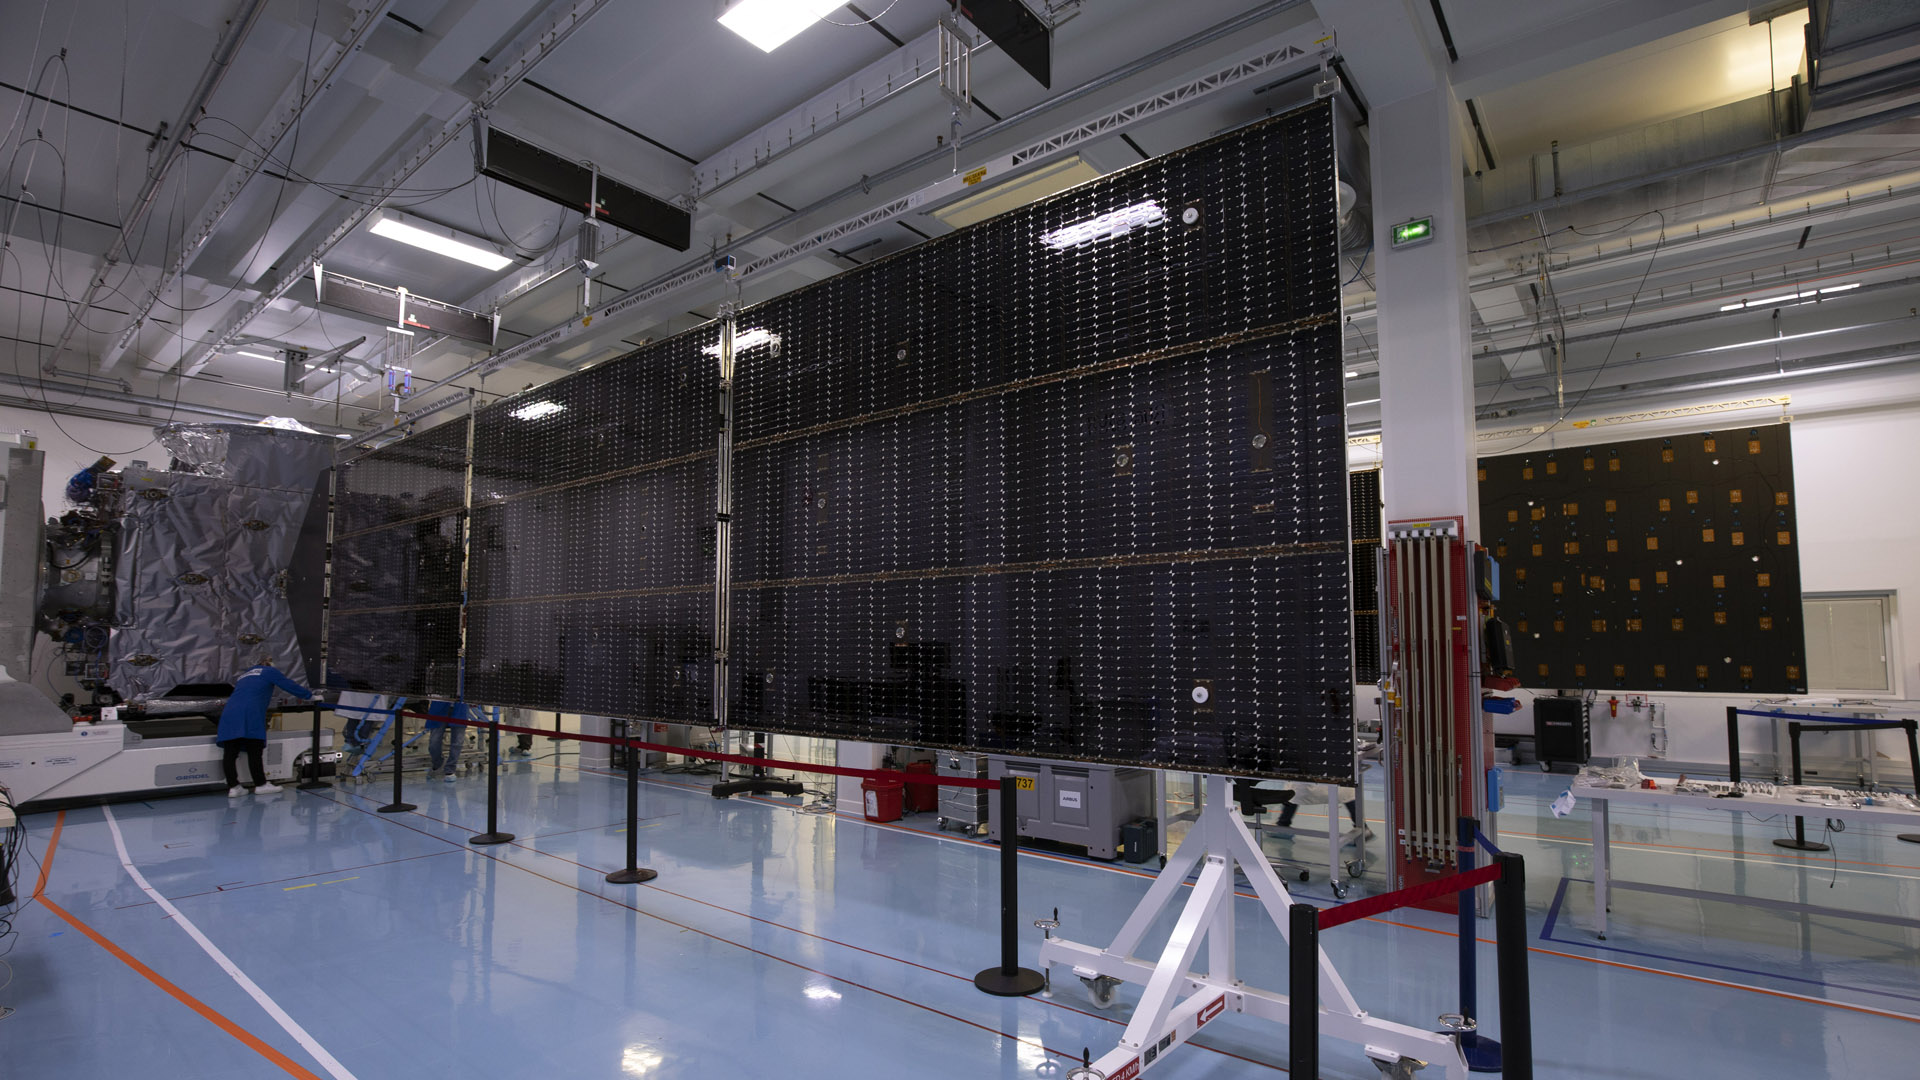 The JUICE spacecraft during a solar array deployment test.